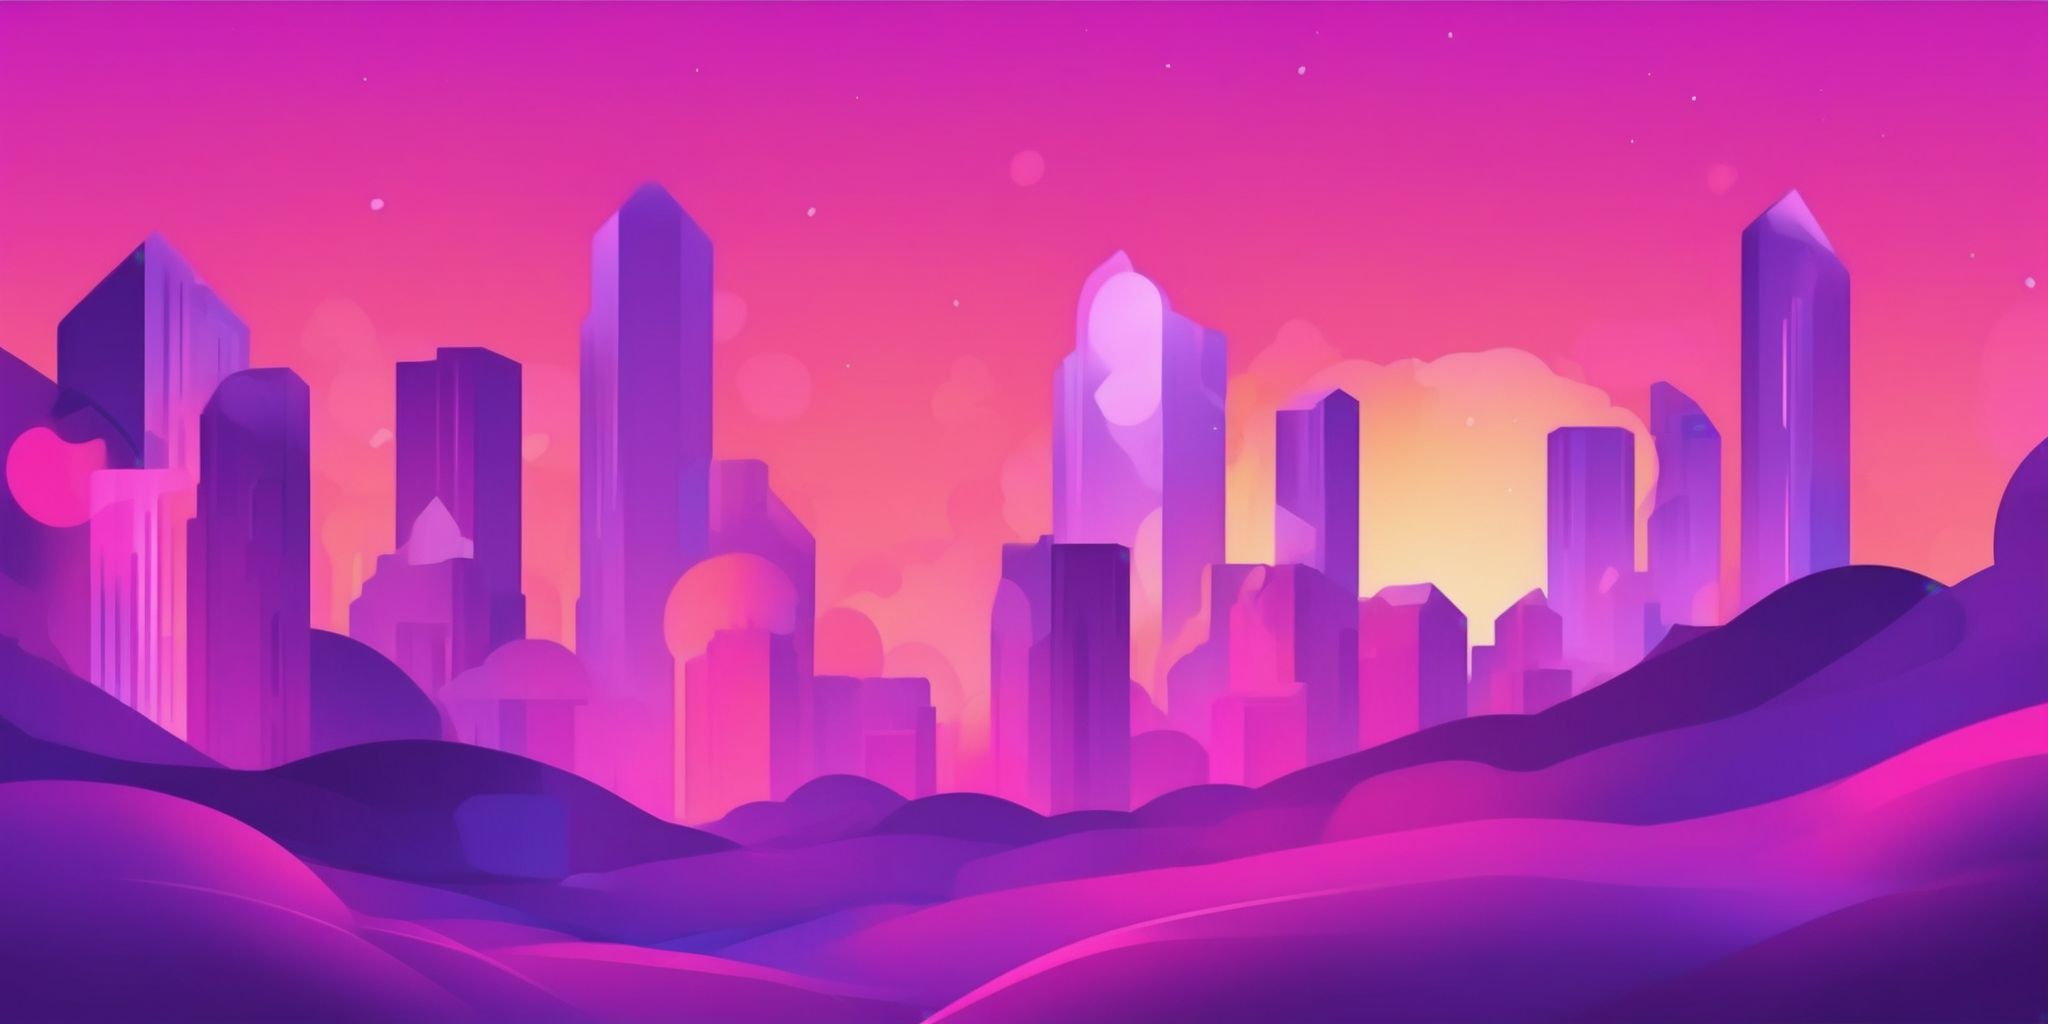 Refresh in flat illustration style, colorful purple gradient colors